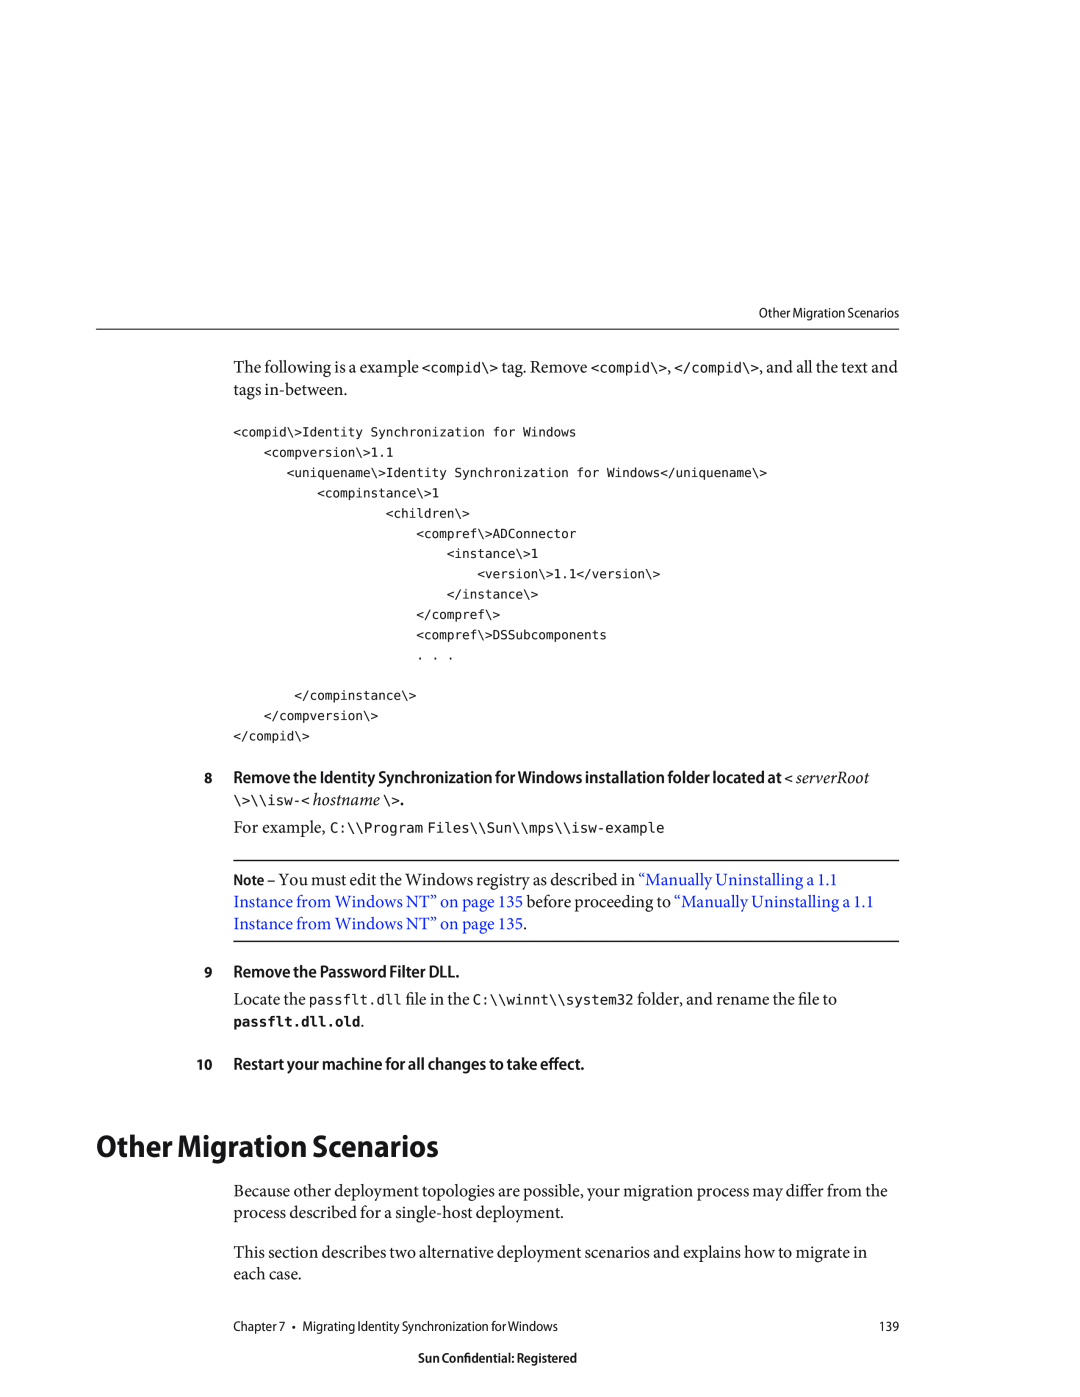 Sun Microsystems 8190994 manual Other Migration Scenarios, Remove the Password Filter DLL 